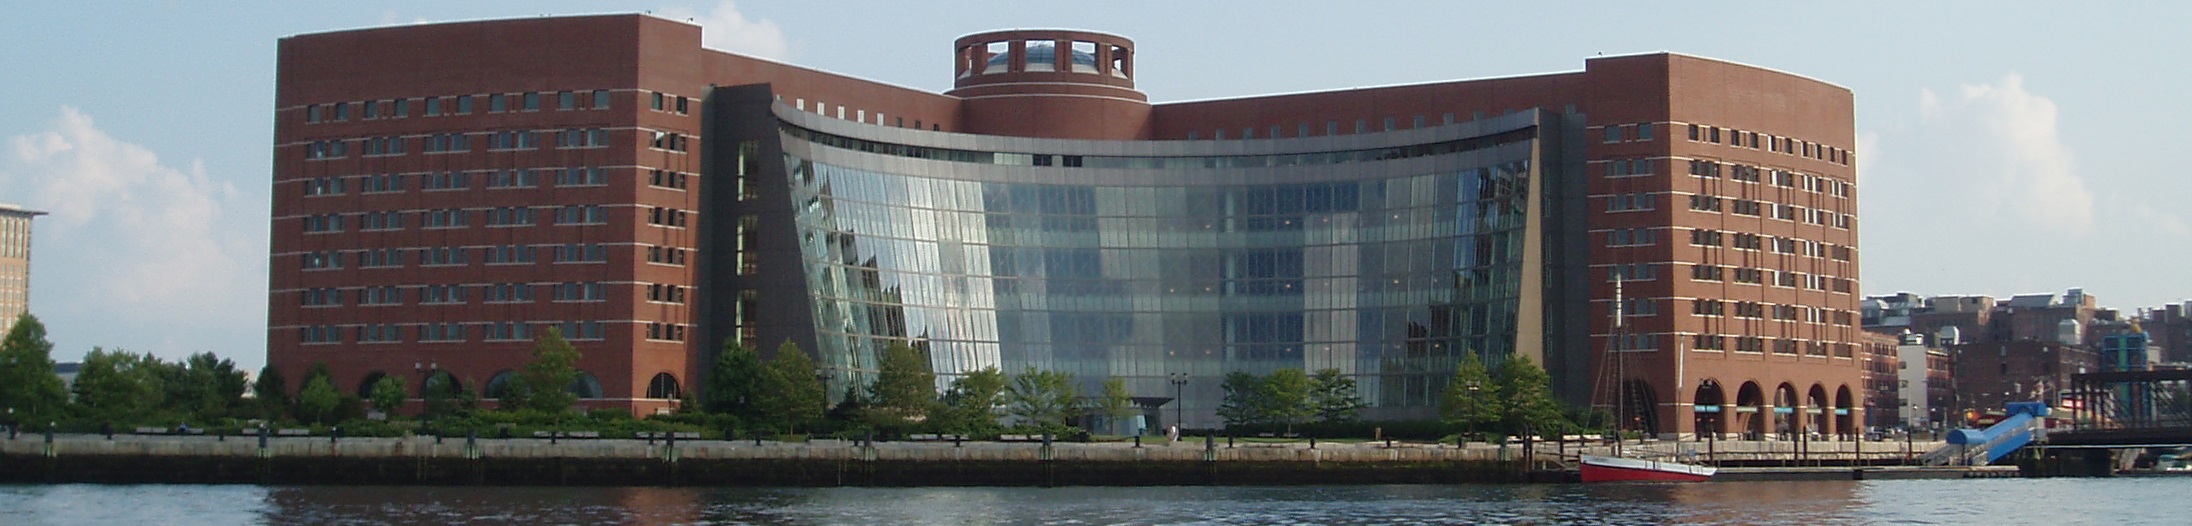 John J. Moakley Federal Courthouse